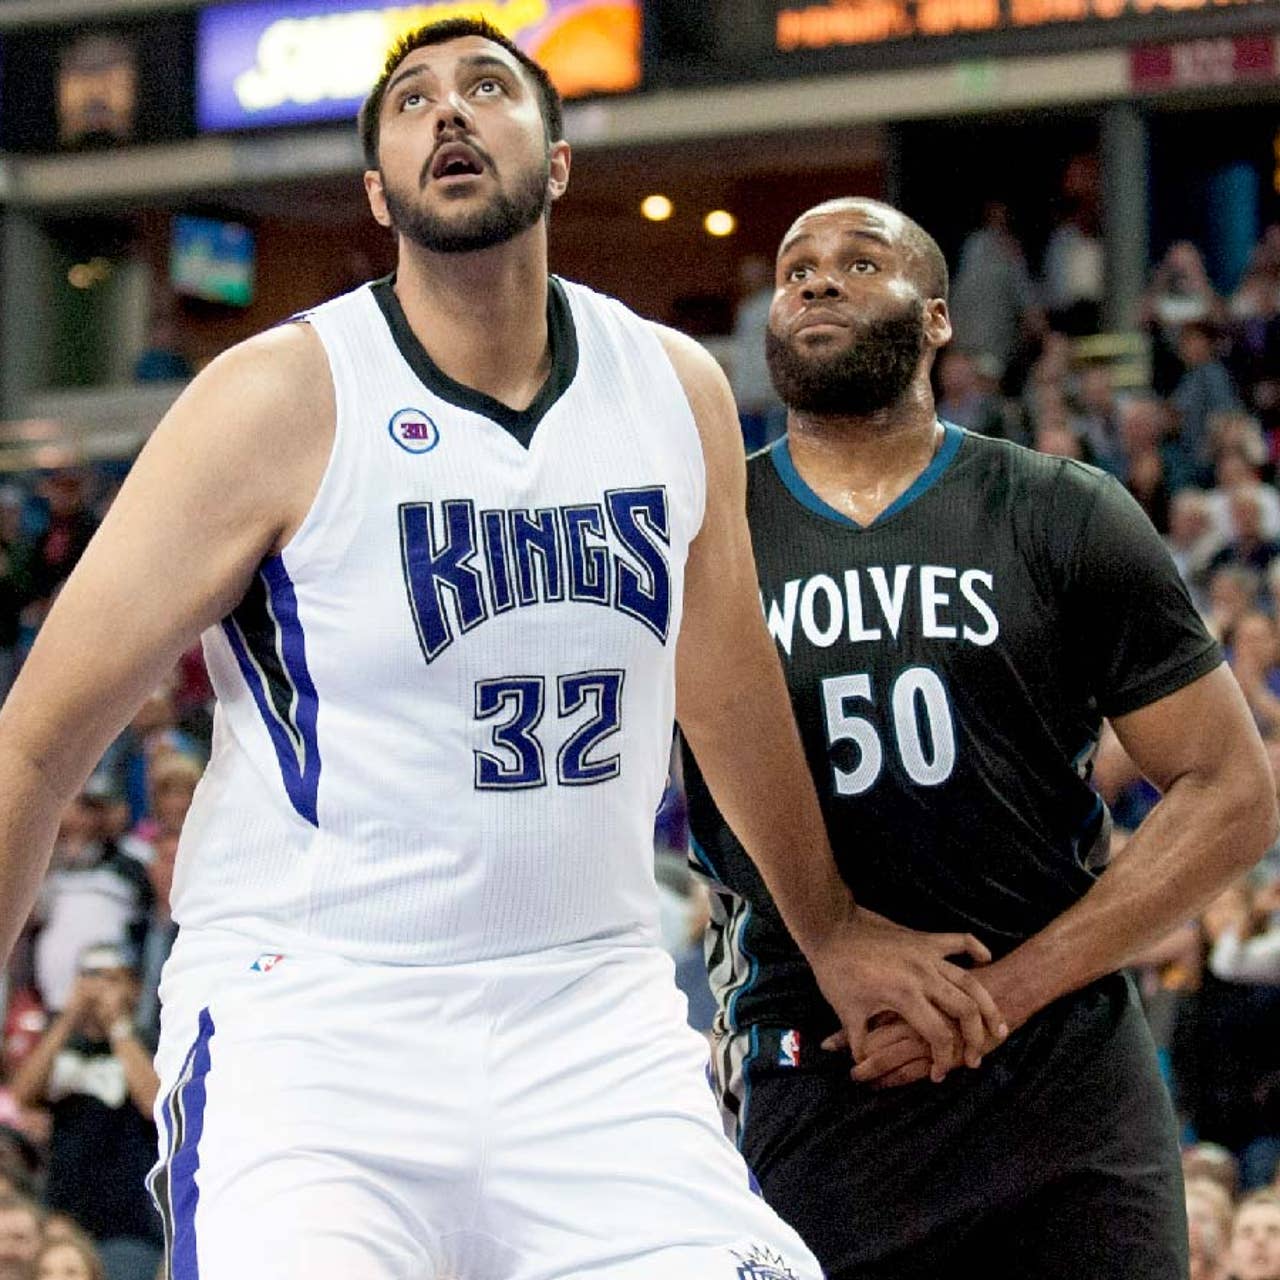 The dream is possible': Sim Bhullar wants to see basketball and